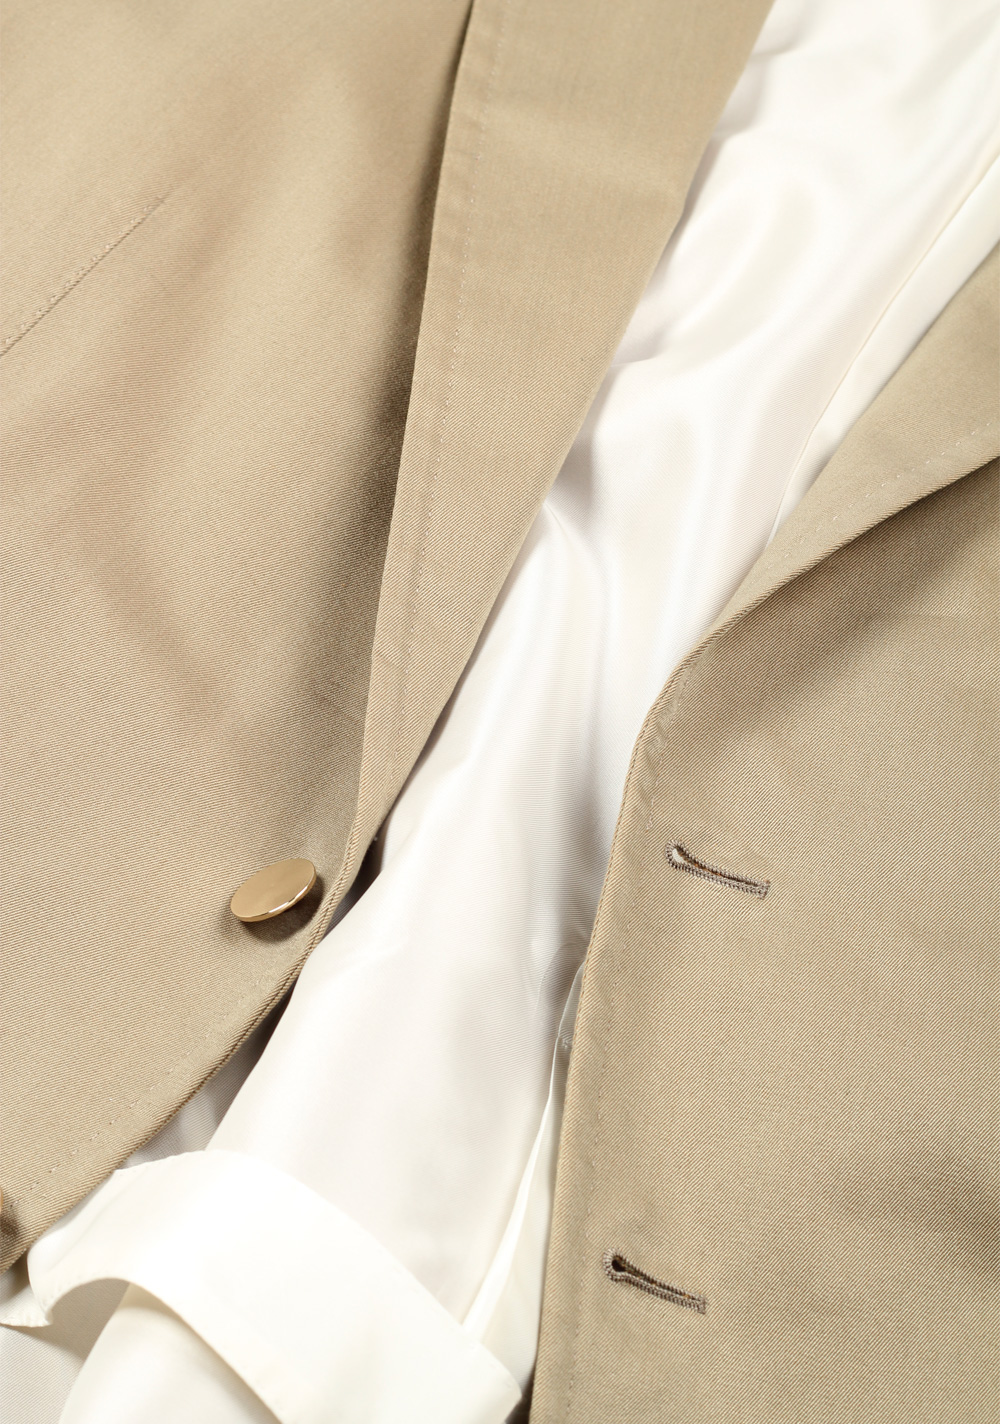 TOM FORD O’Connor Beige Sport Coat Size 54 / 44R U.S. Fit Y | Costume Limité